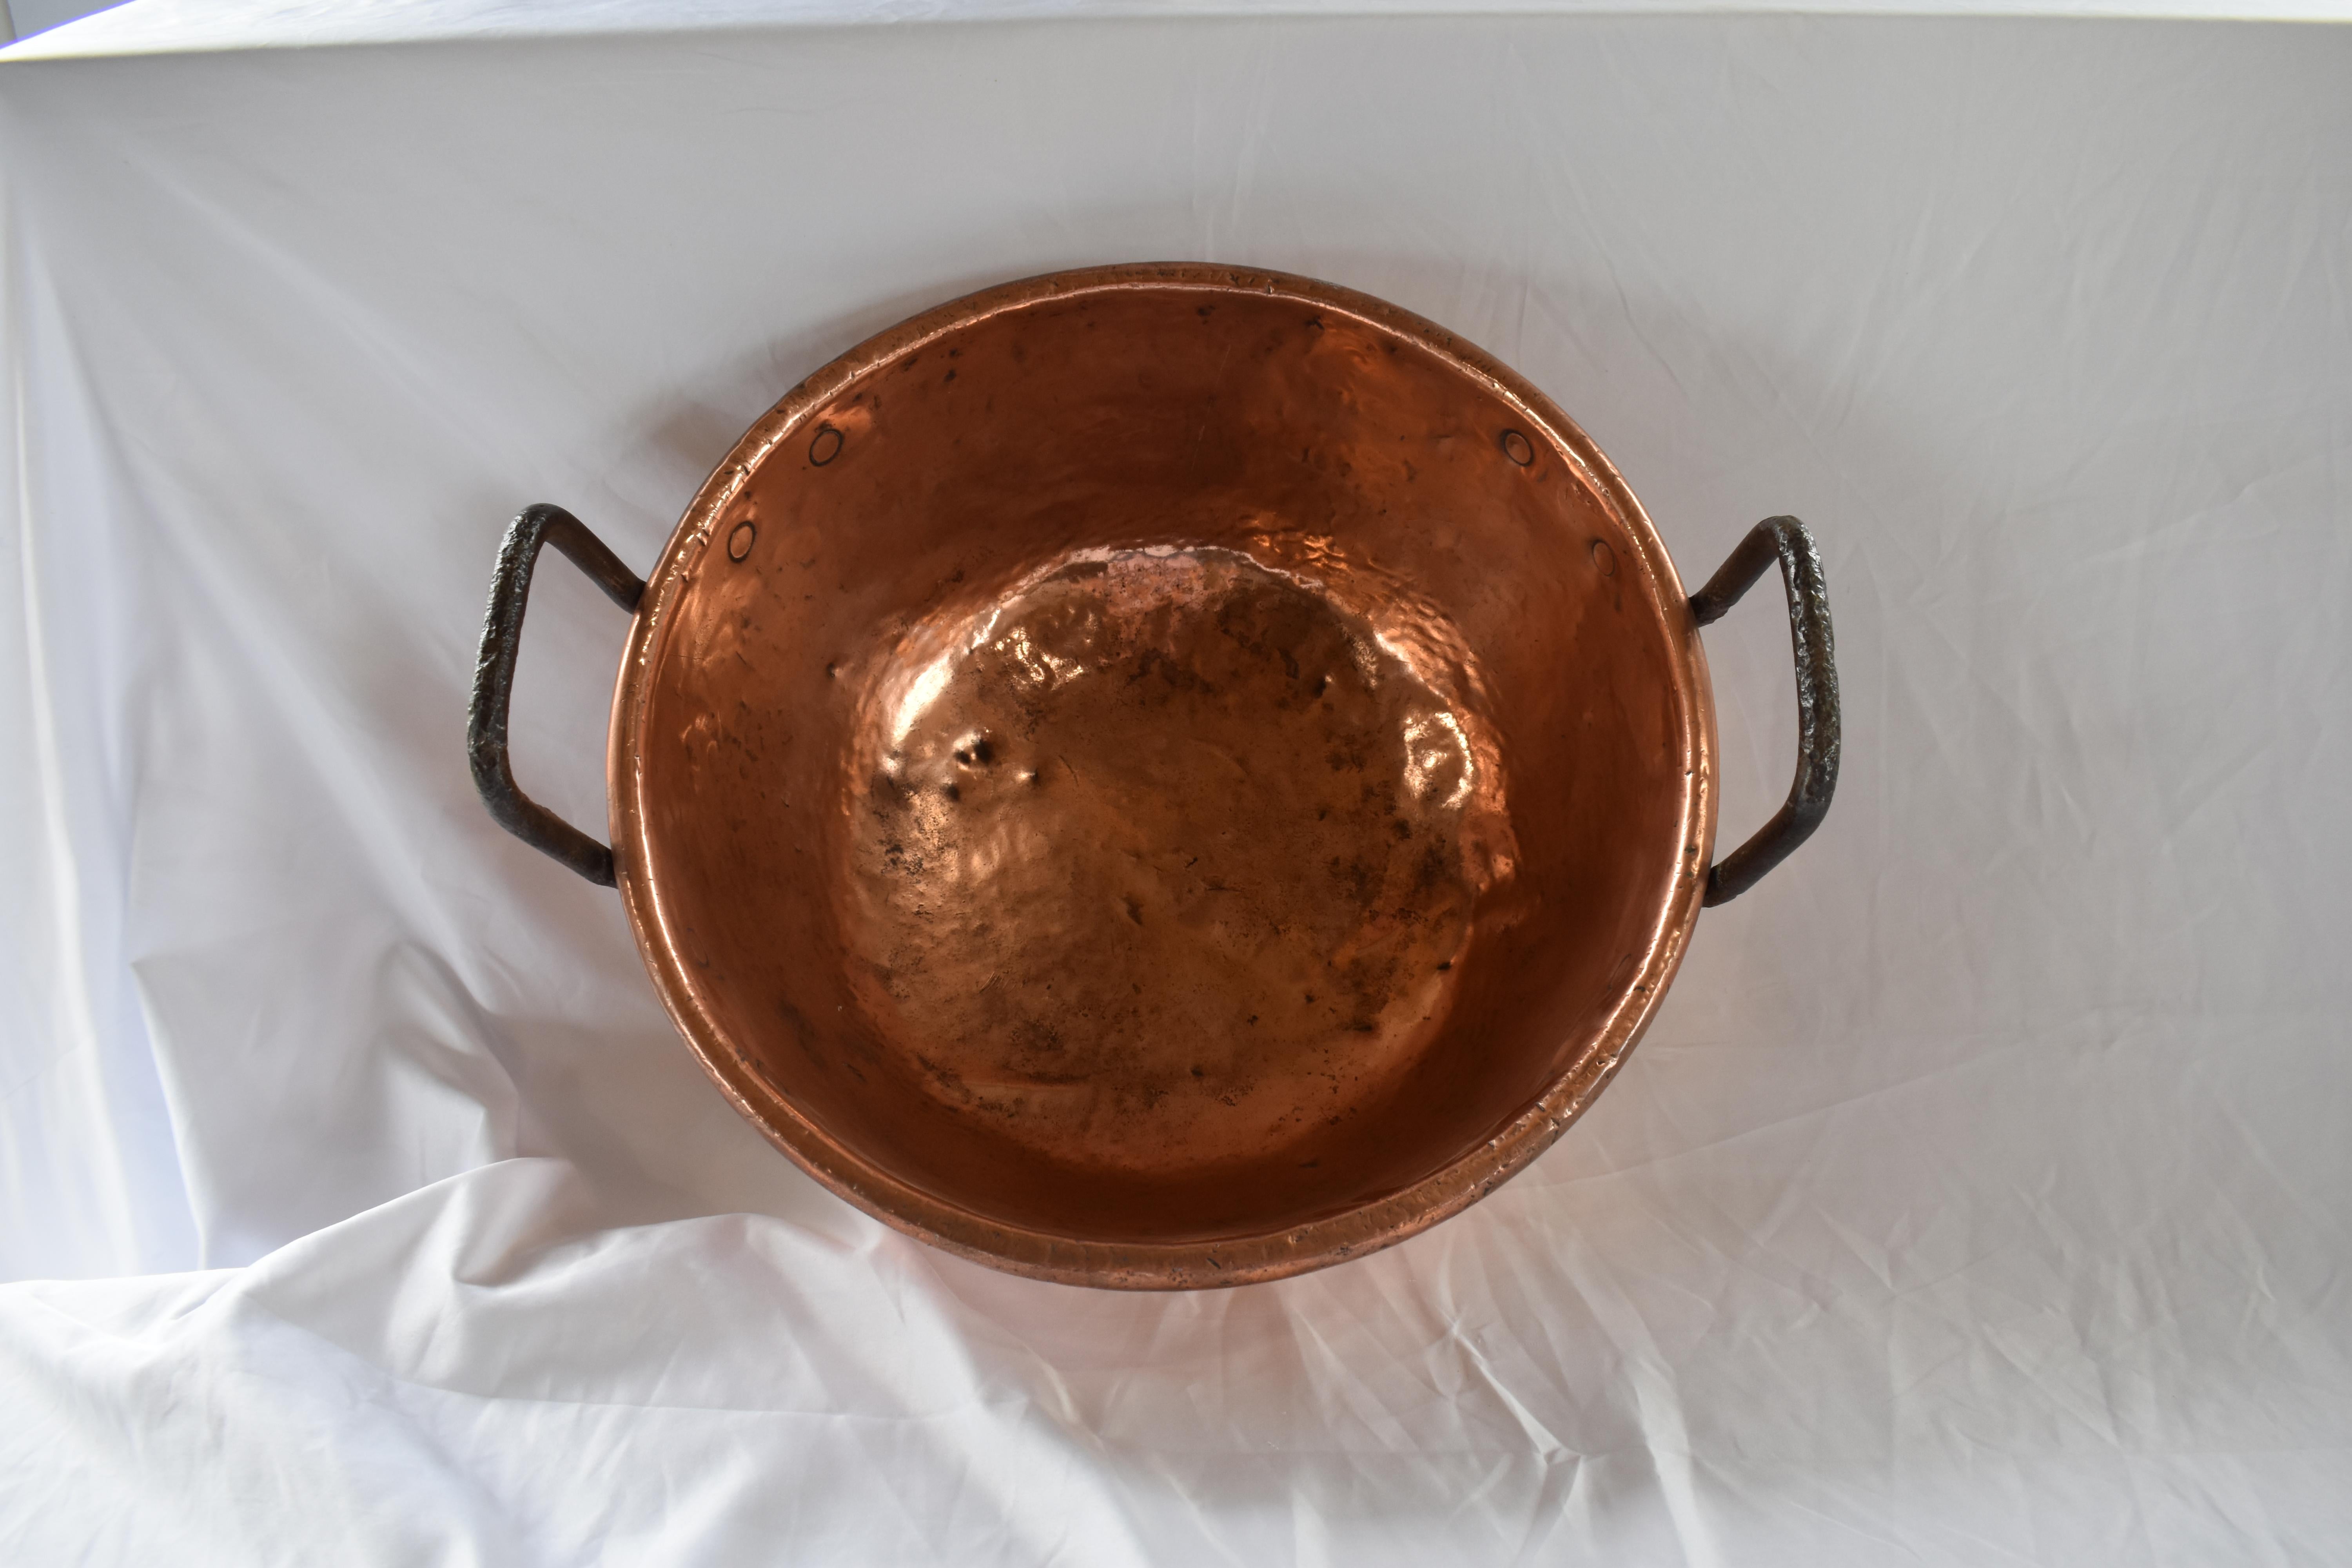 Copper candy kettle from France made towards the end of the 19th century, with beautiful finish. The kettle was made by hammering the copper into shape by hand. As shown in the pictures one can see the marks made by the tools. The handles were